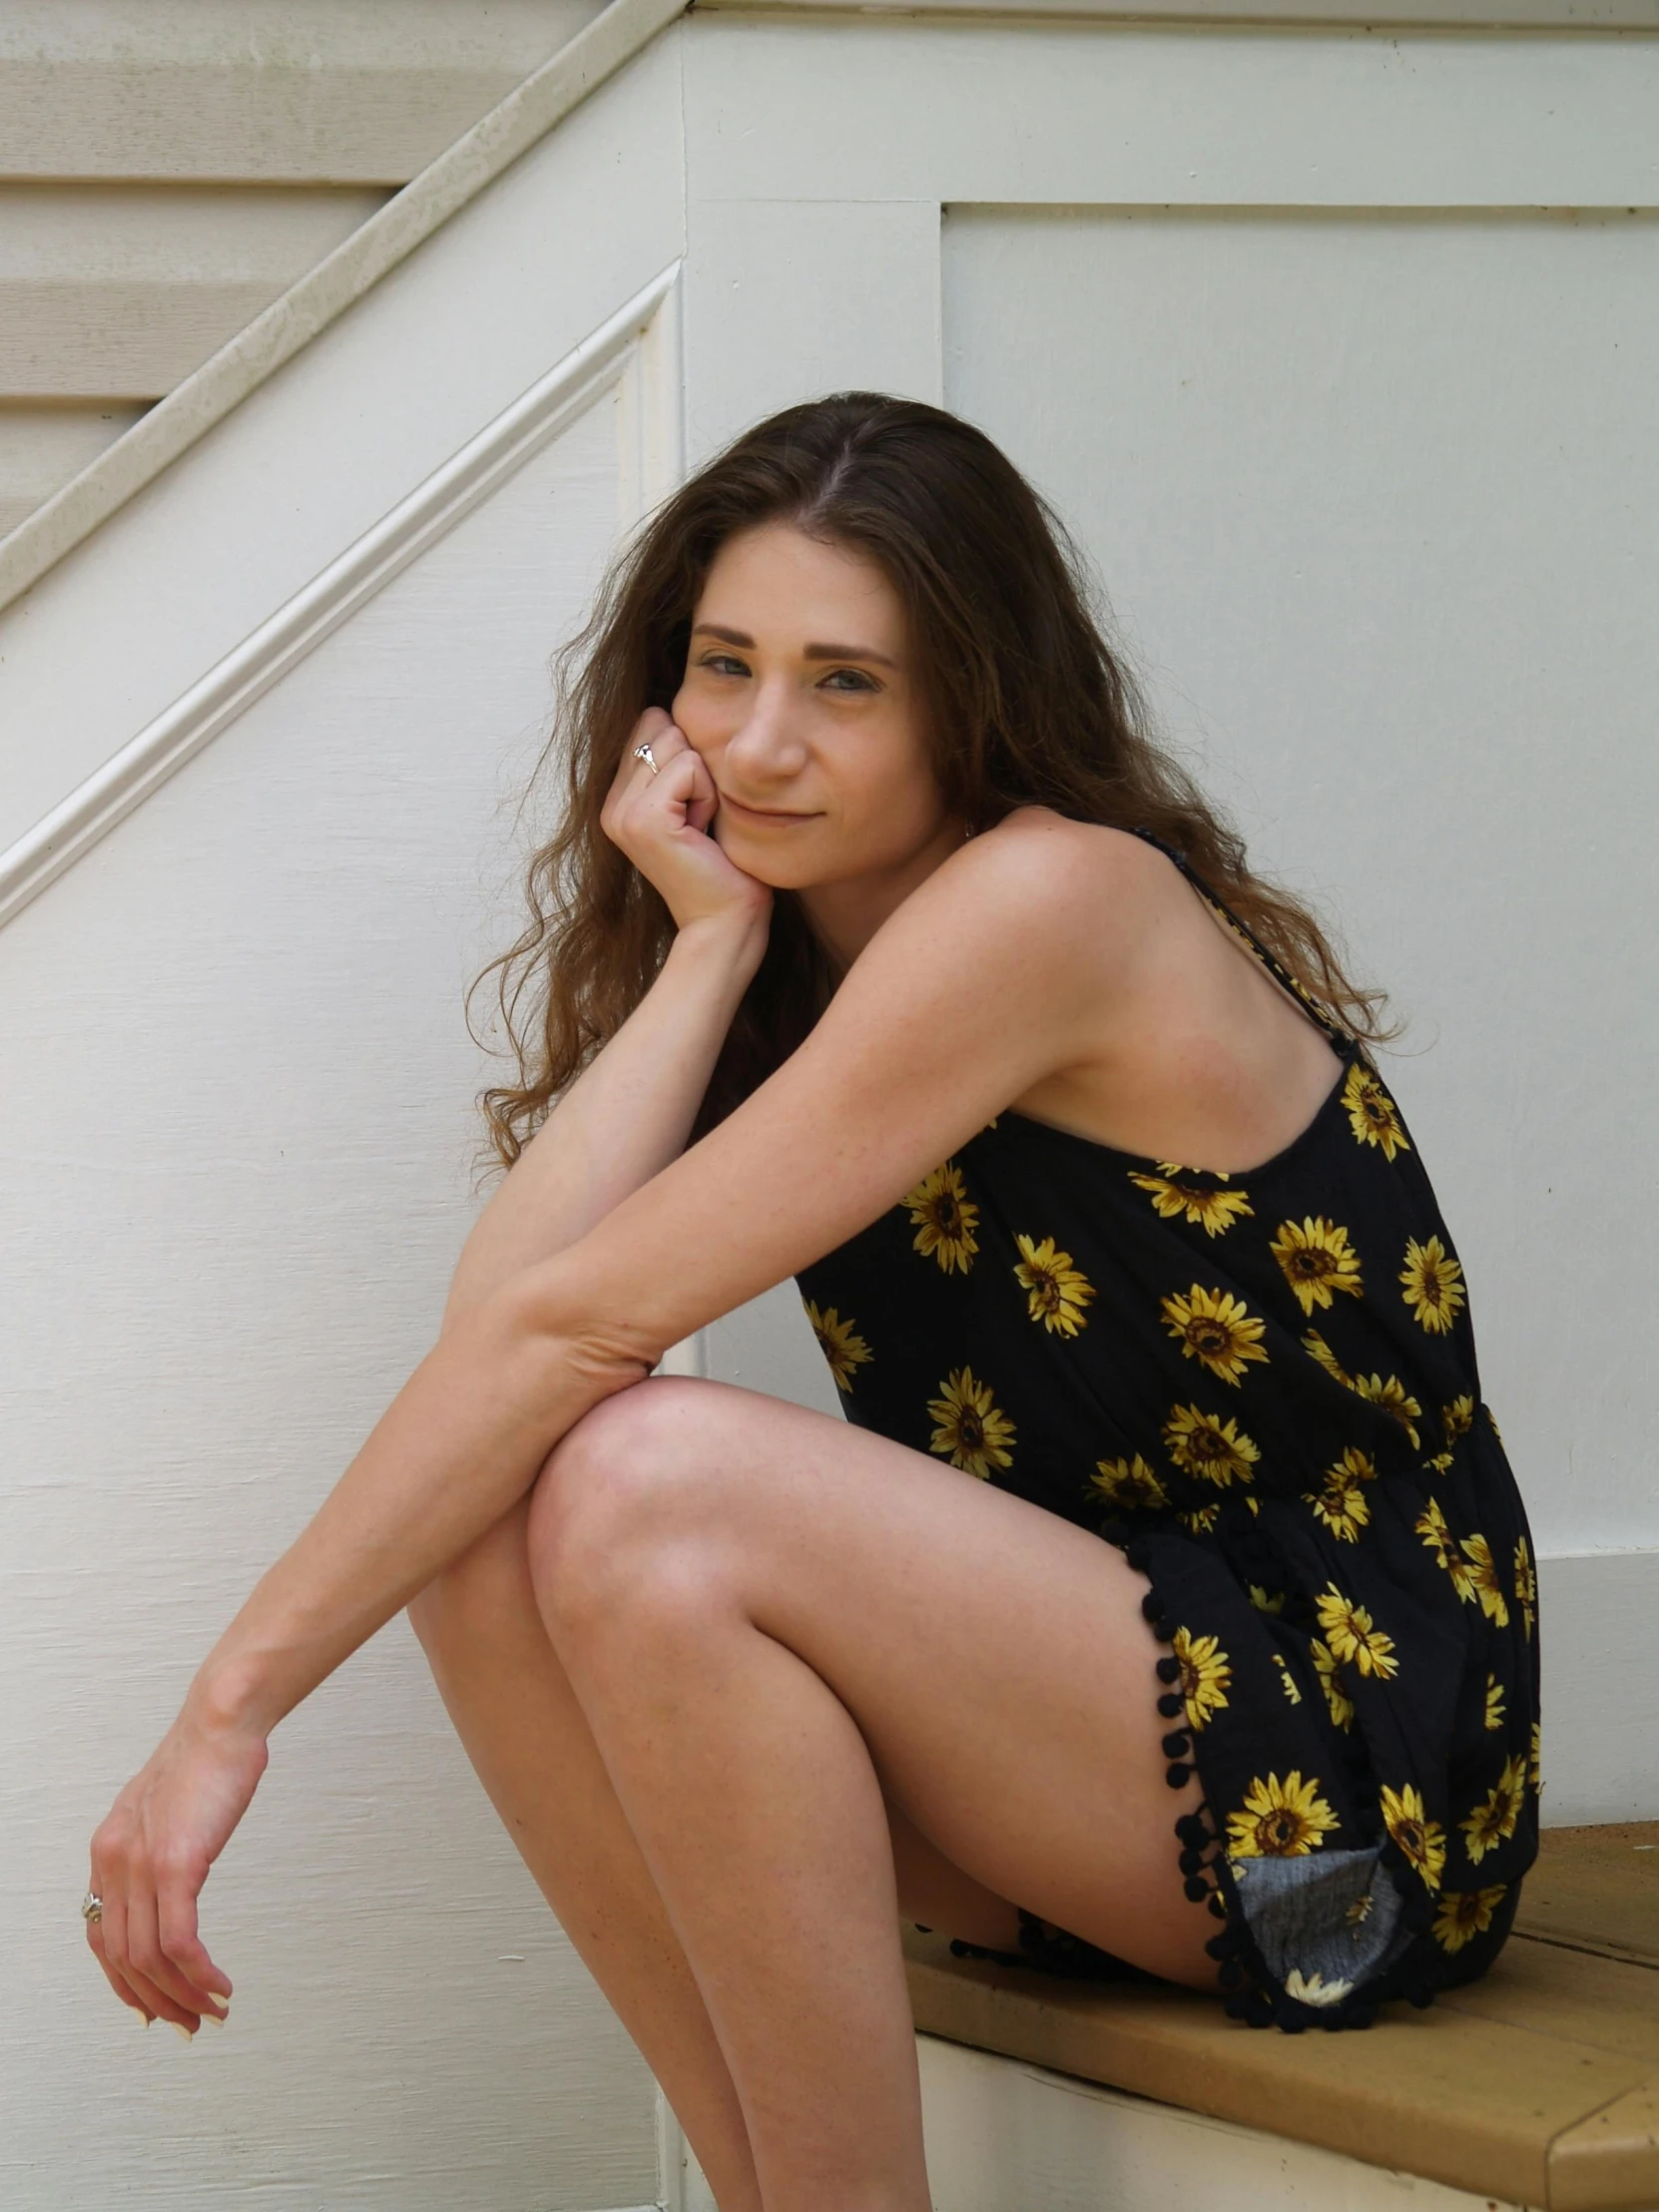 a woman sitting on the steps of a house, an album cover, by Lucette Barker, pexels contest winner, sunflowers, tight black tank top and shorts, thoughtful pose, patterned clothing